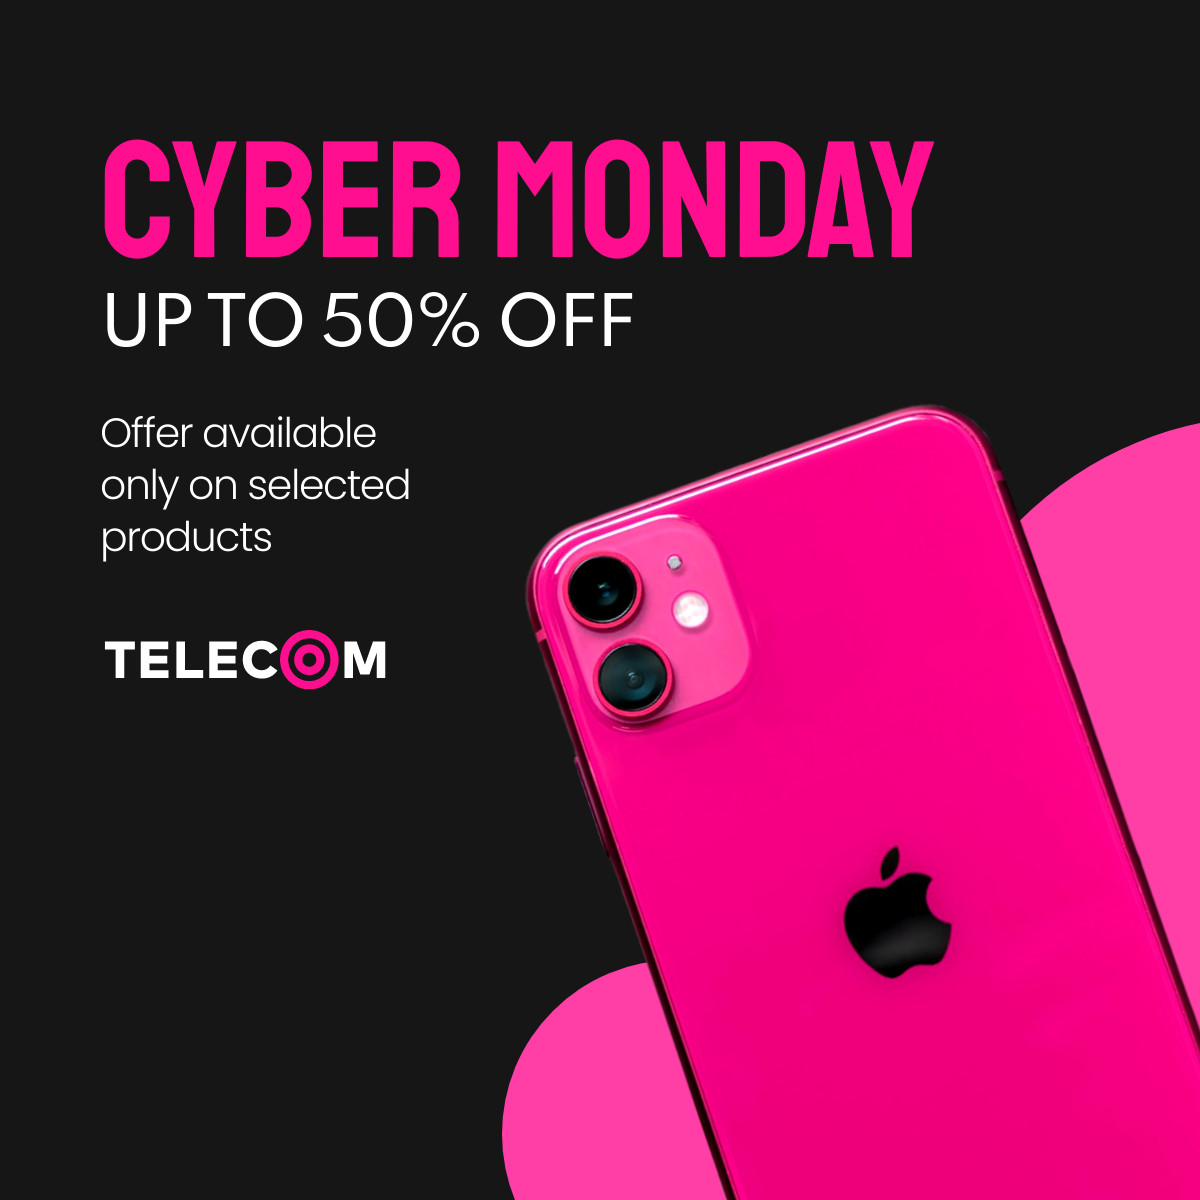 Cyber Monday Pink Apple Phone Inline Rectangle 300x250